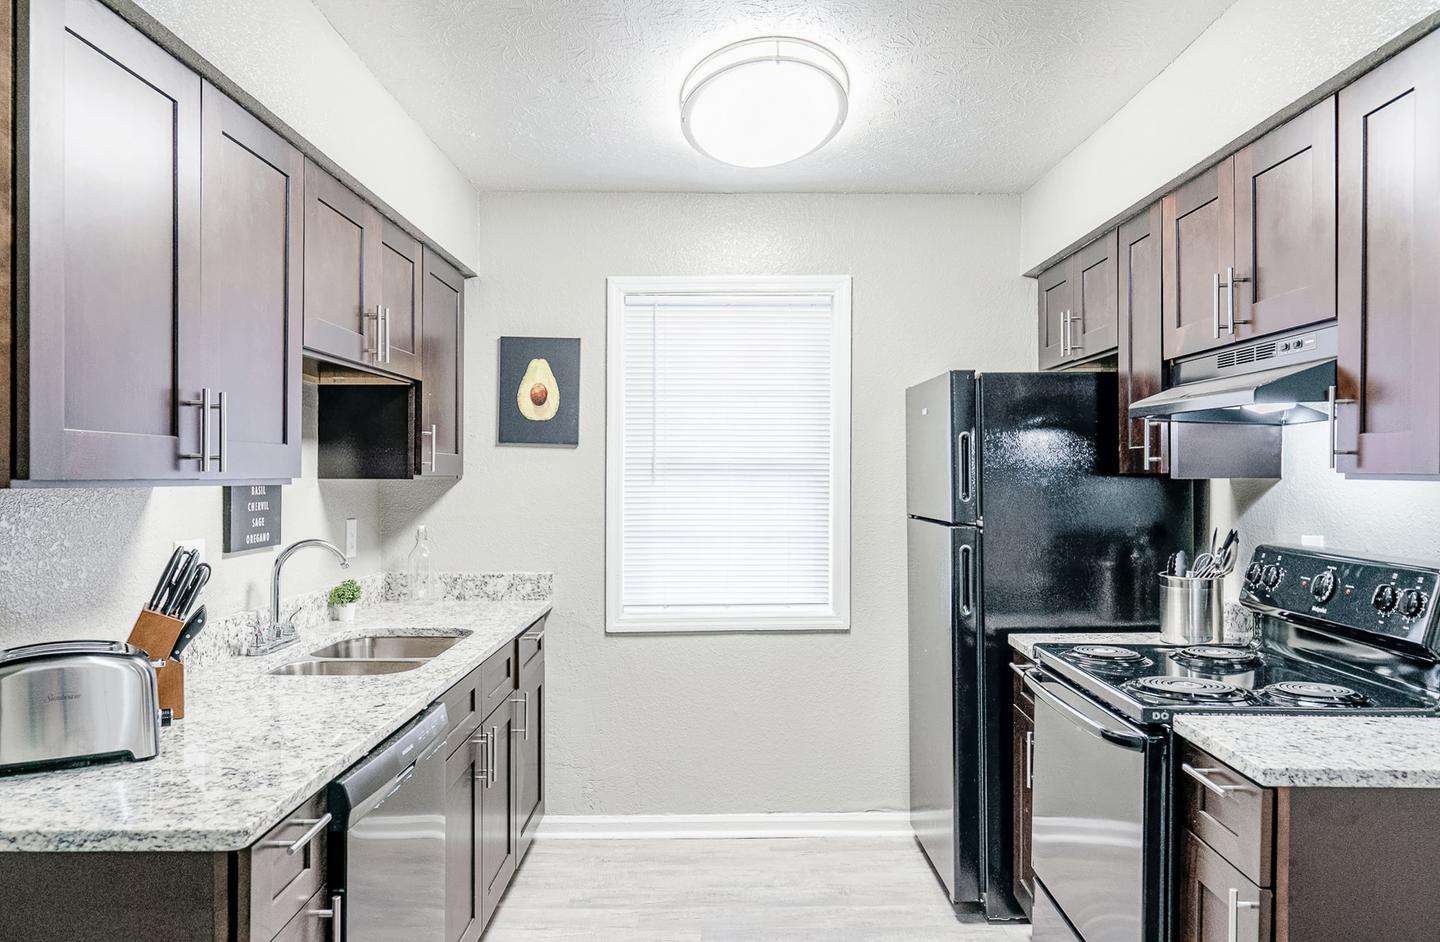 Gorgeous kitchen with granite countertops, cookware, toaster, utensils, and black appliances.